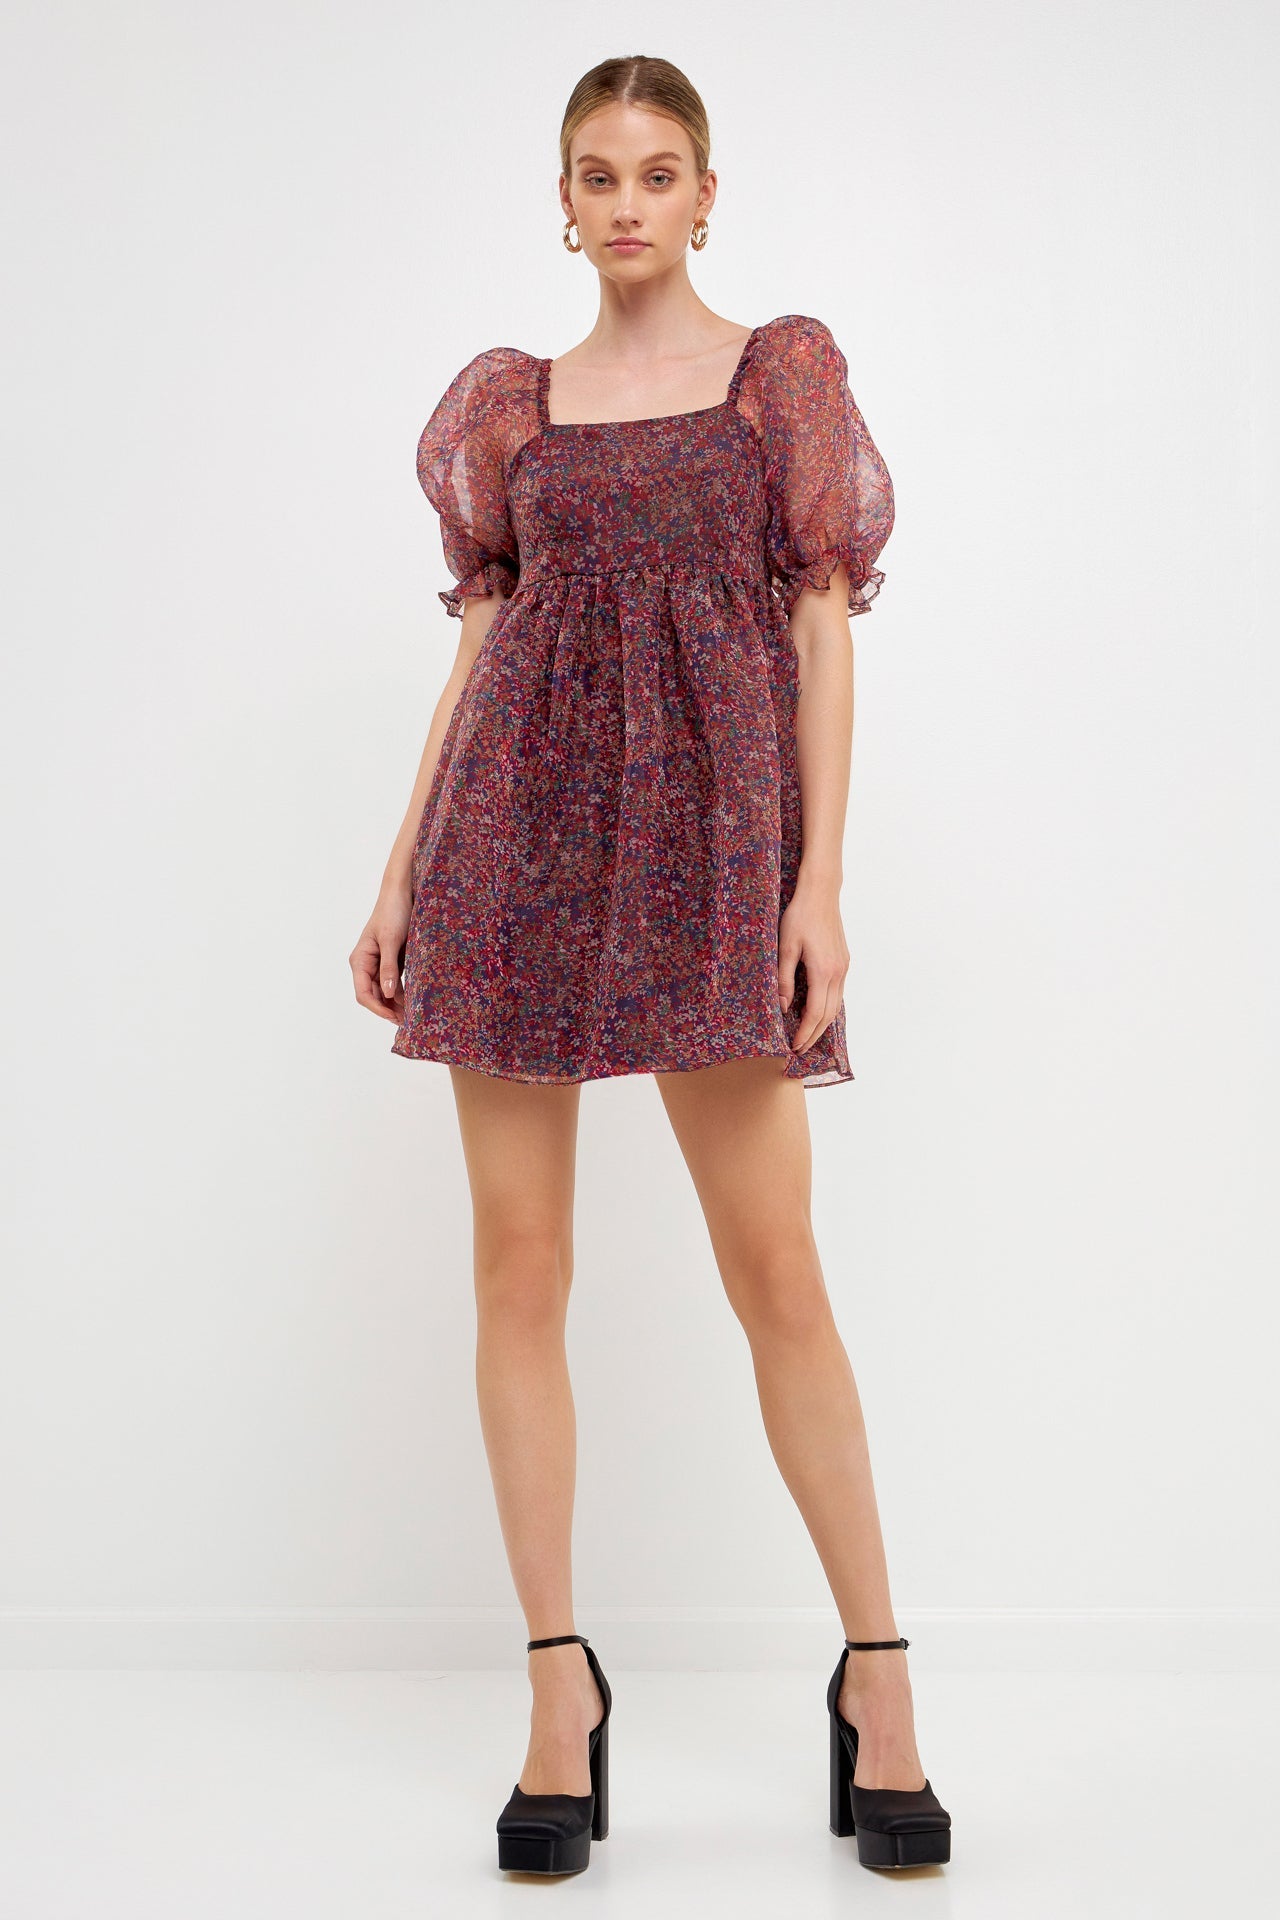 Endless Rose - Floral Puff Mini Dress - Dresses in Women's Clothing available at endlessrose.com